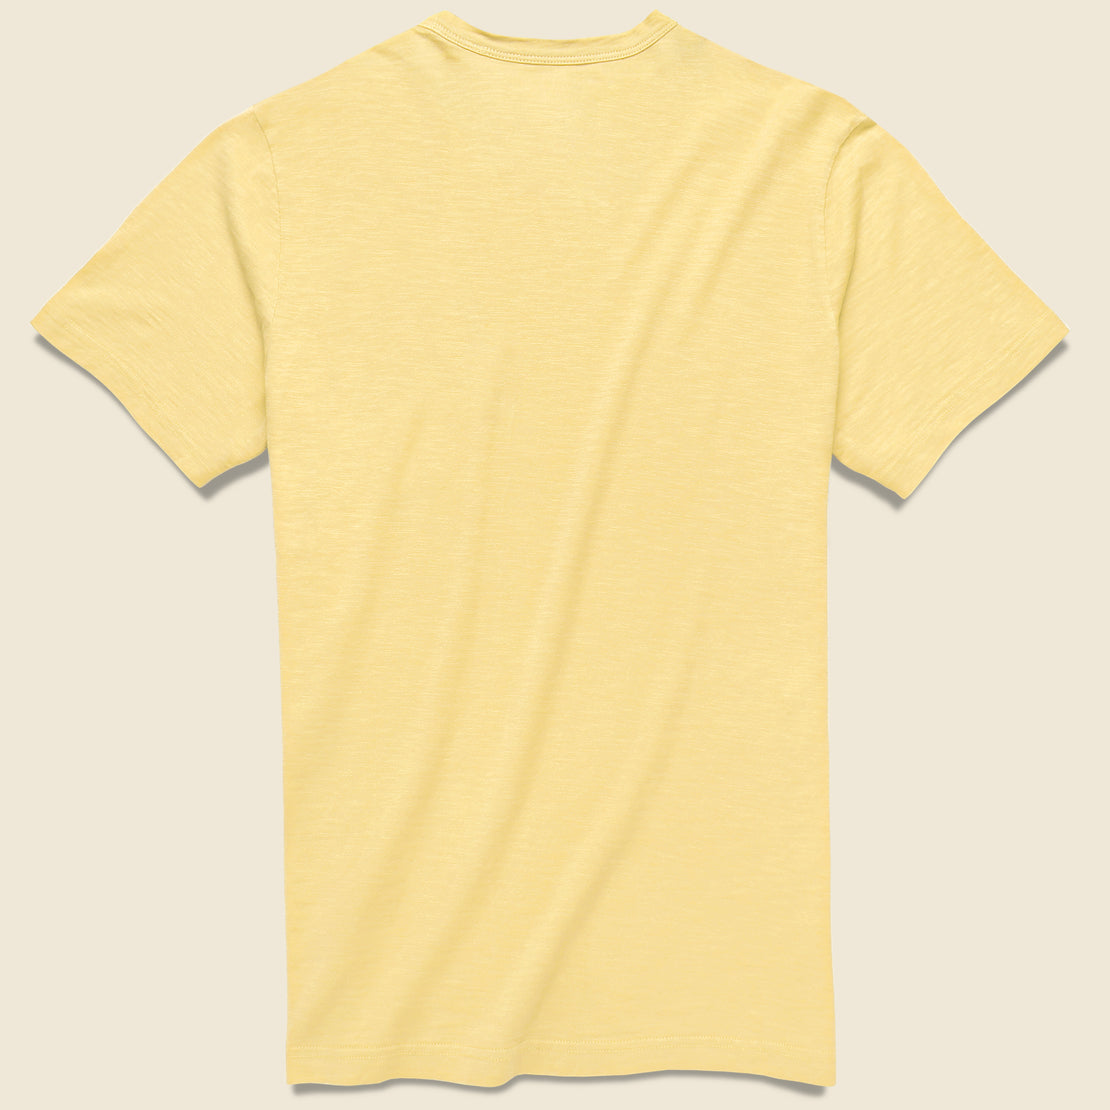 Garment Dyed Pocket Tee - Golden Coast - Faherty - STAG Provisions - Tops - S/S Tee